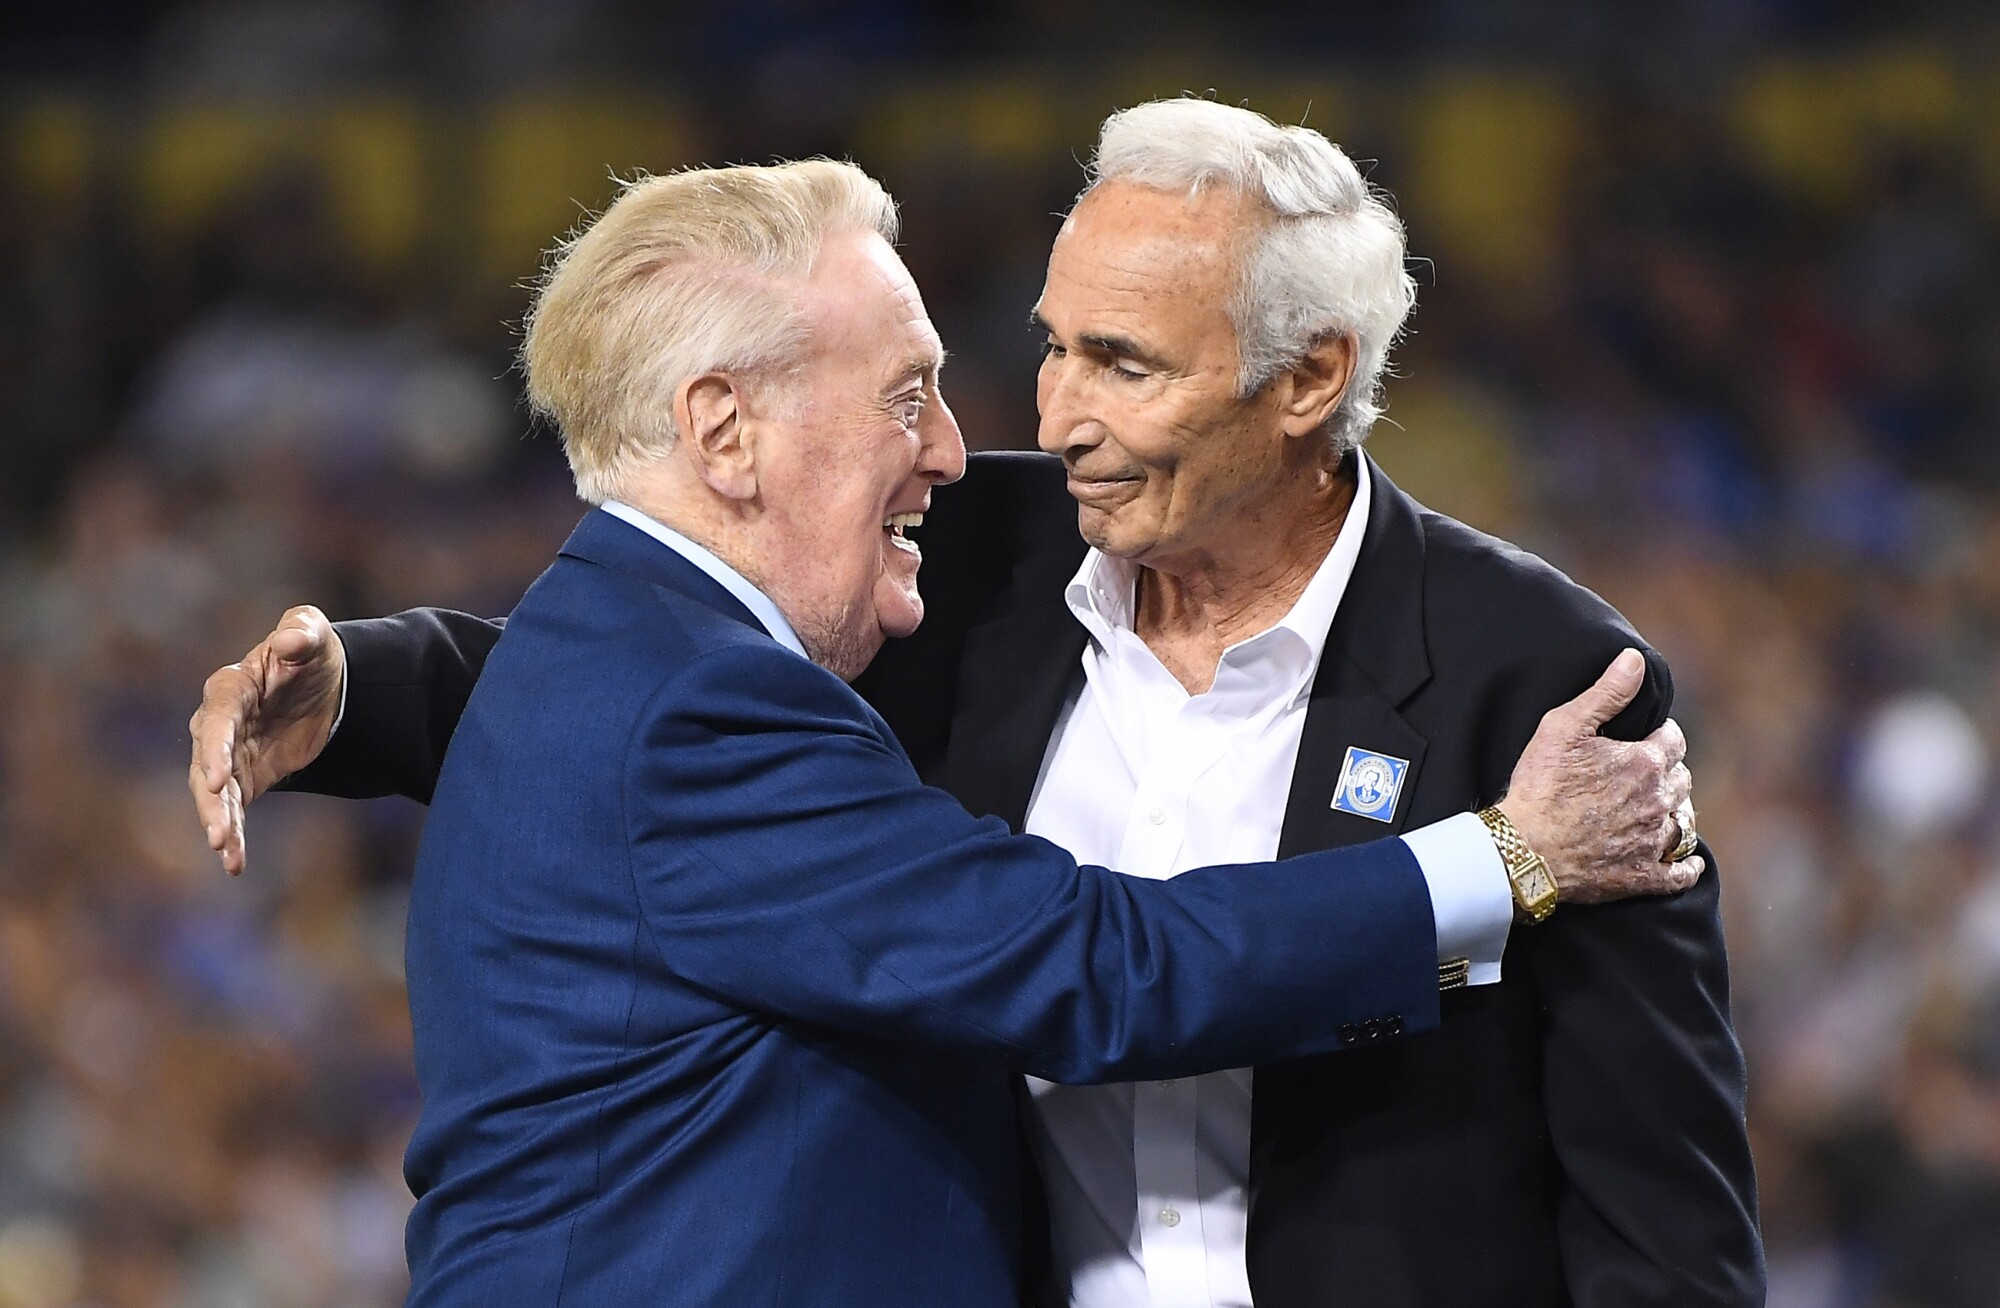 Dodgers announcer Vin Scully hugs former pitcher Sandy Koufax during the Vin Scully appreciation night.